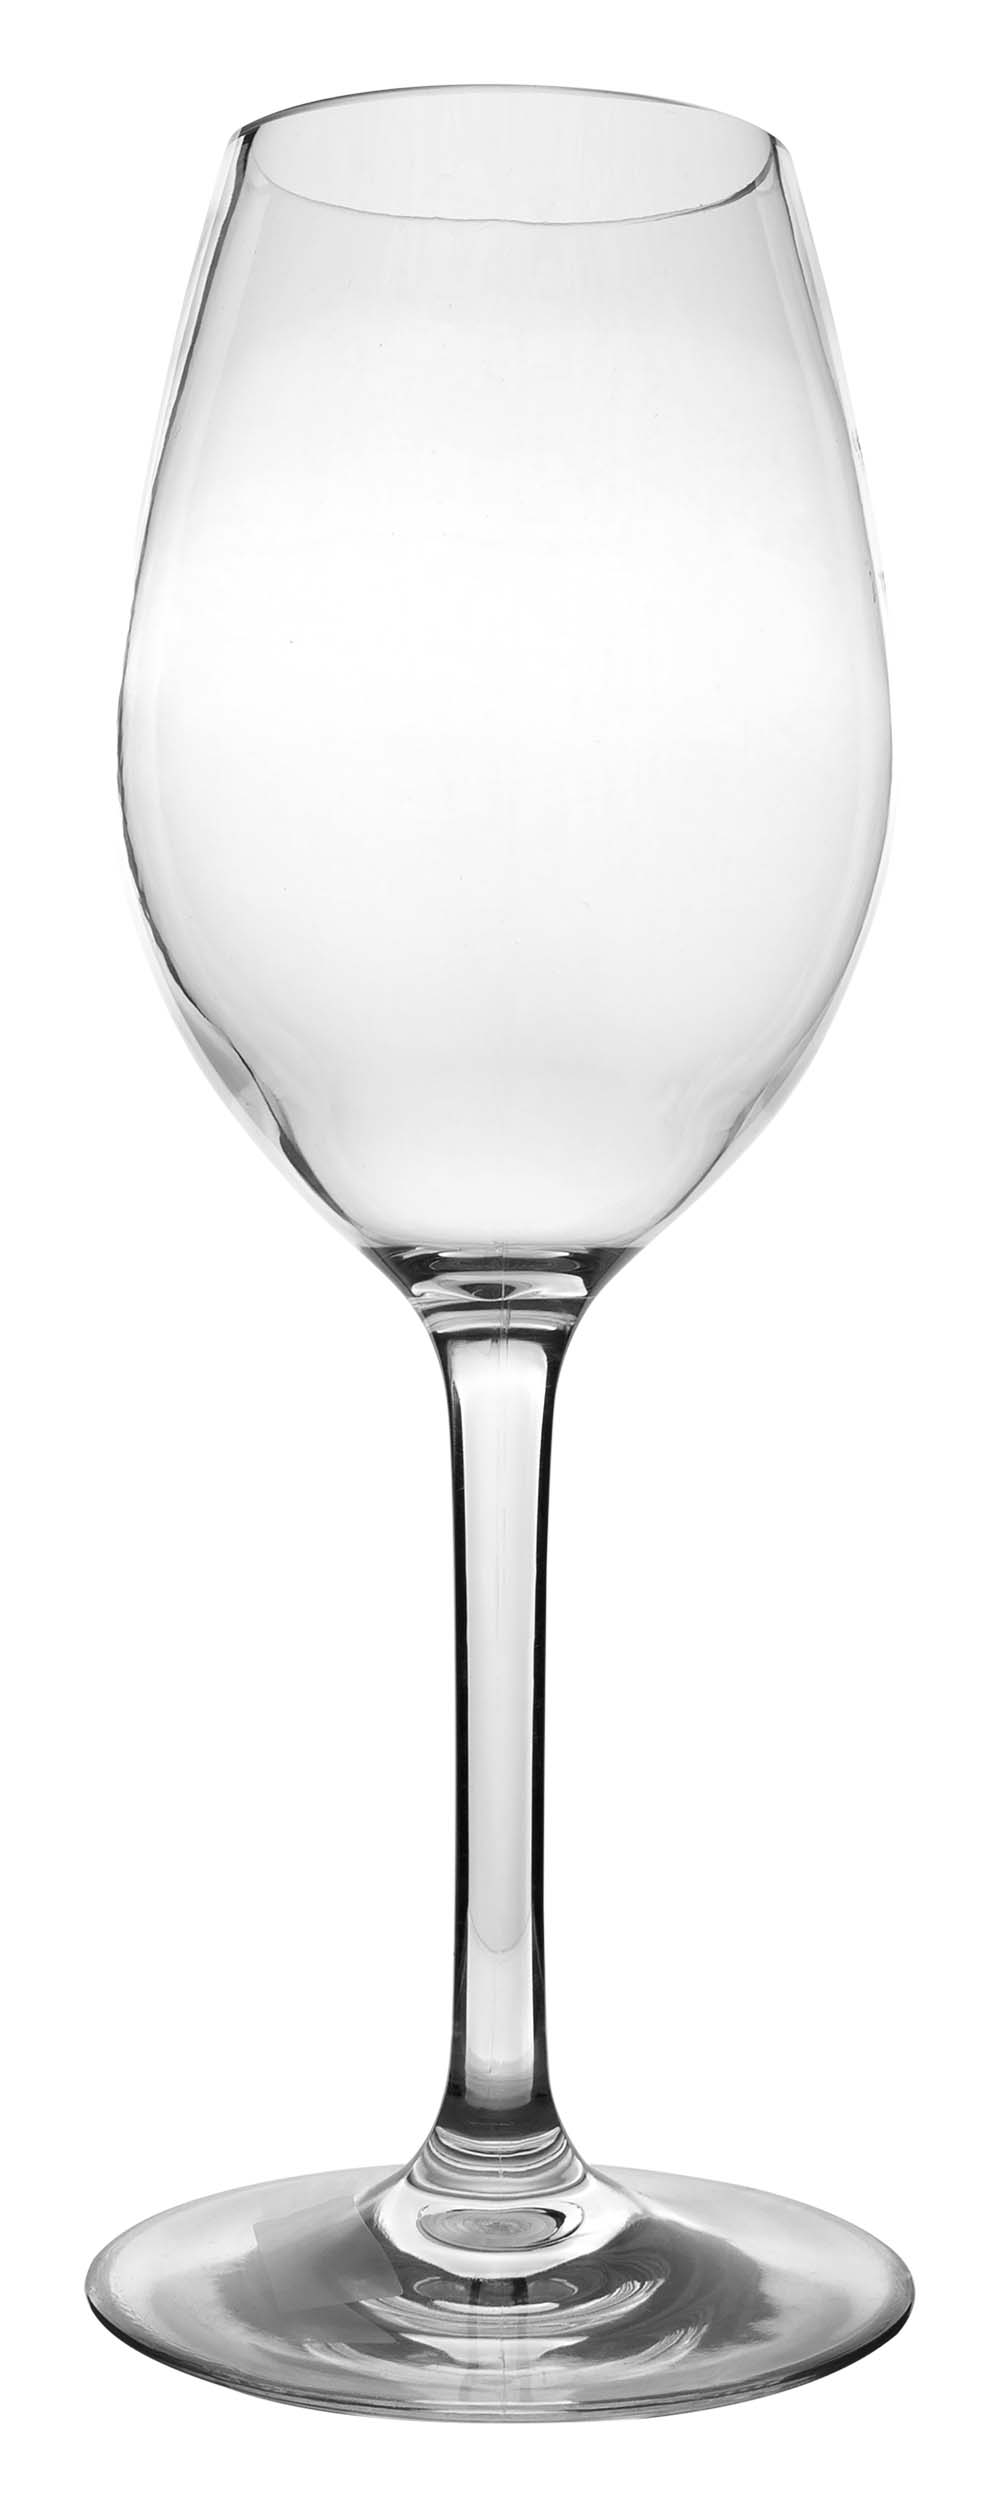 6101461 An almost unbreakable luxury white wine glass with a round and stylish design. Dishwasher safe, lightweight and even better scratch resistant. Made of strong tritan. A set of 2 glasses. The glasses are BPA free.